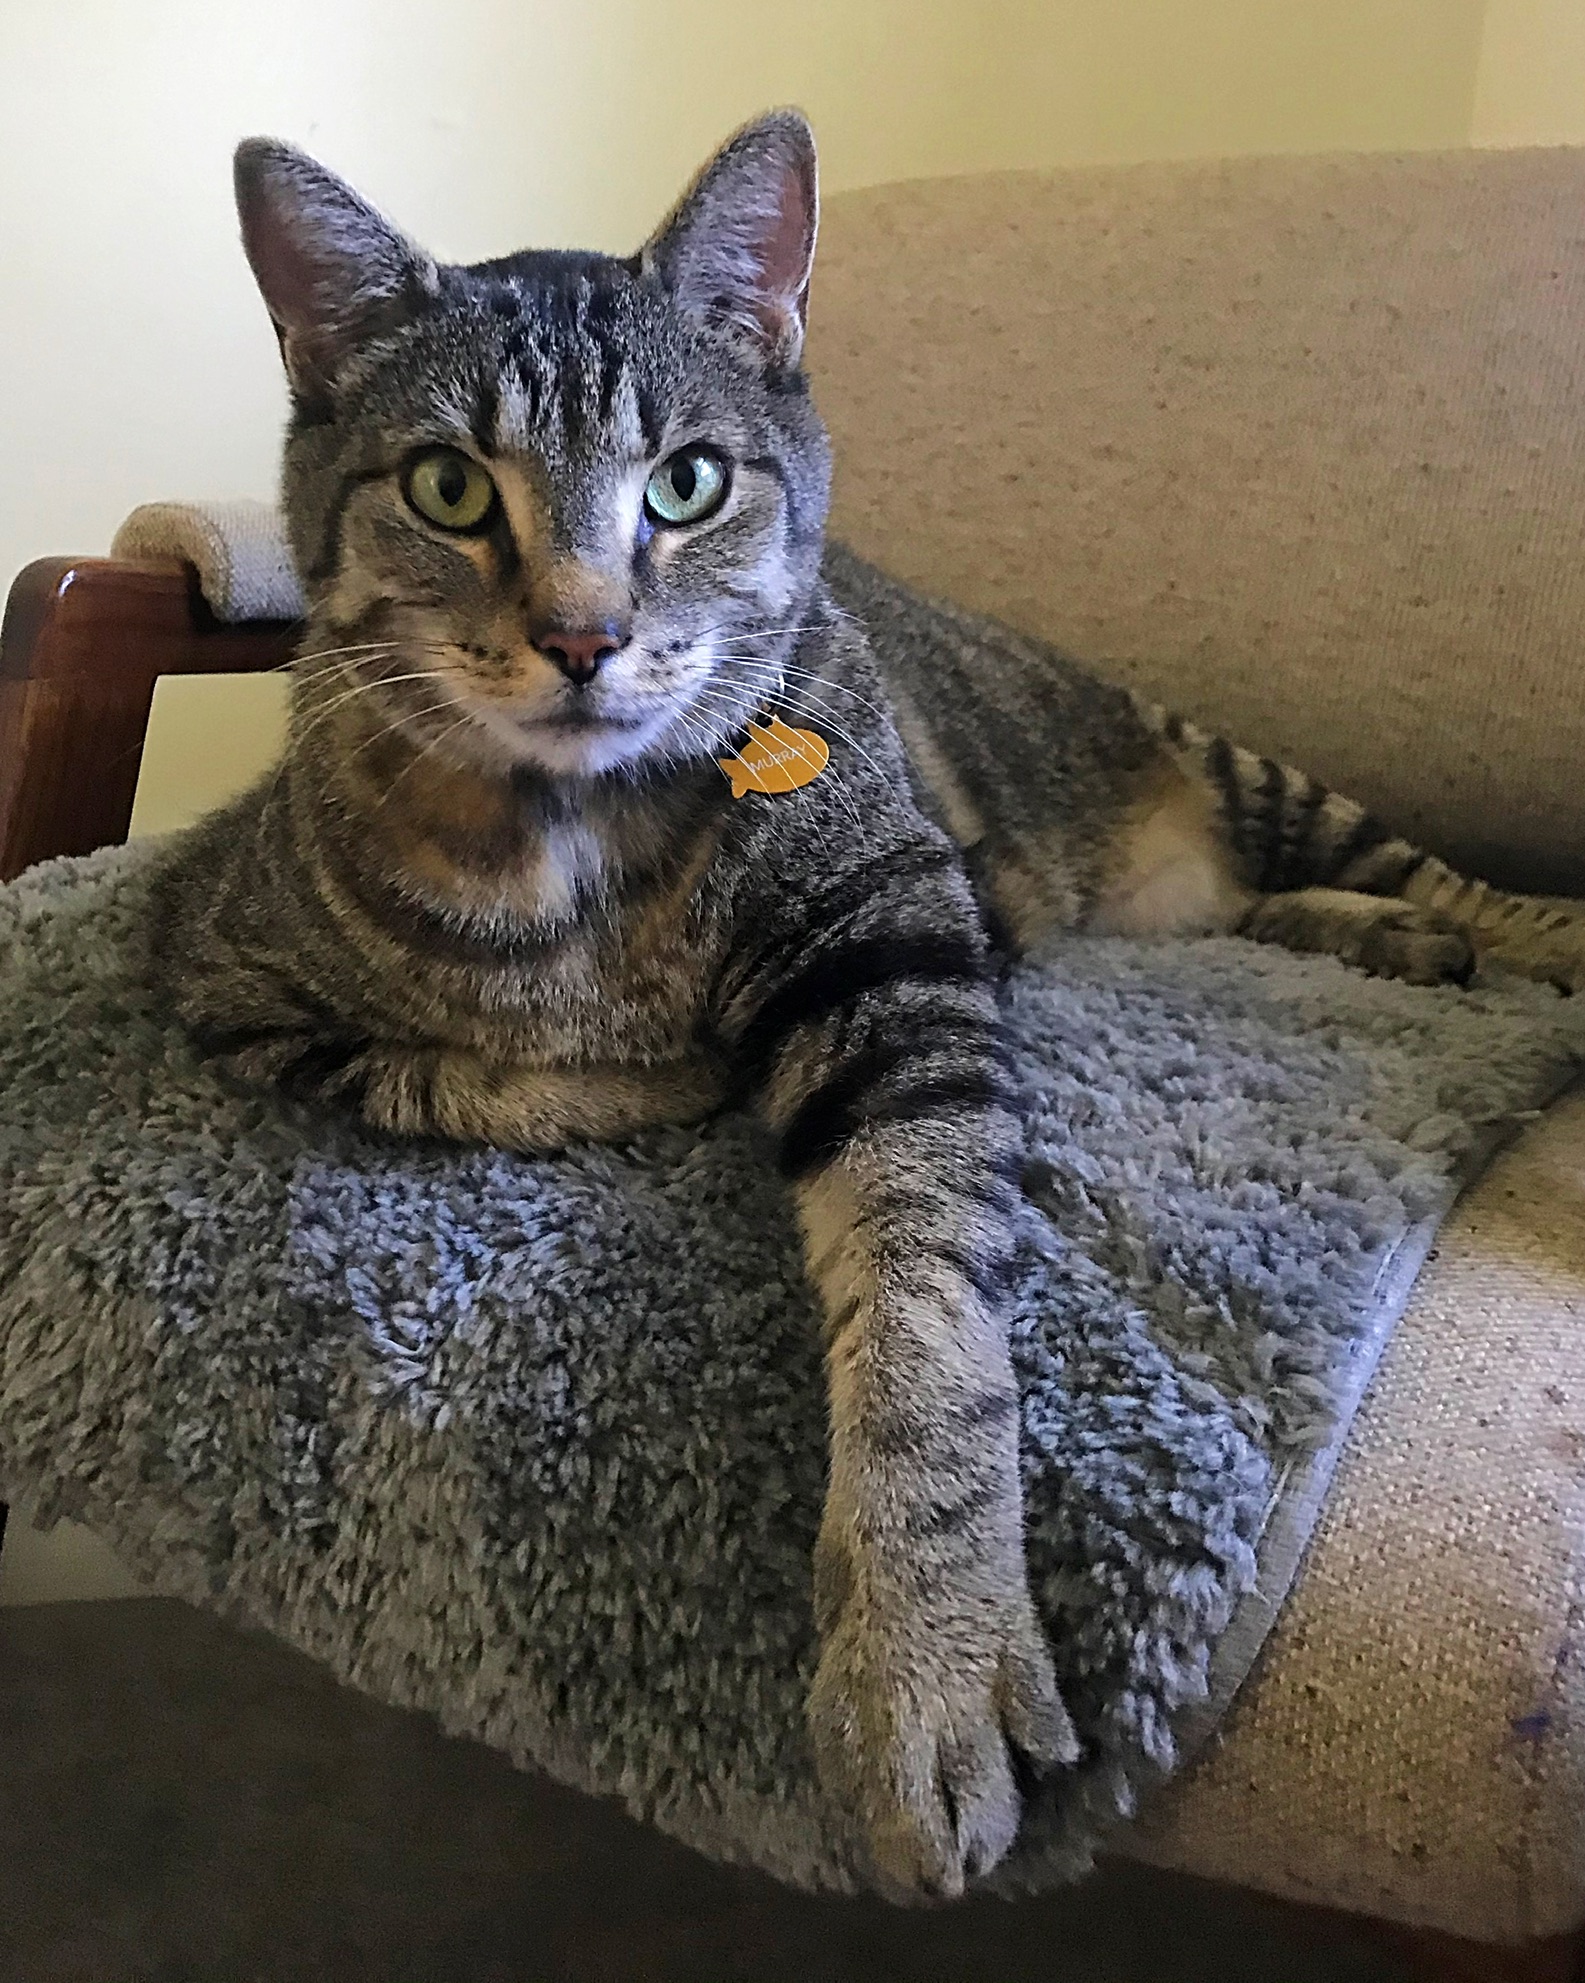 "A very special guy"—How CHFA saved a cat in a dire health situation